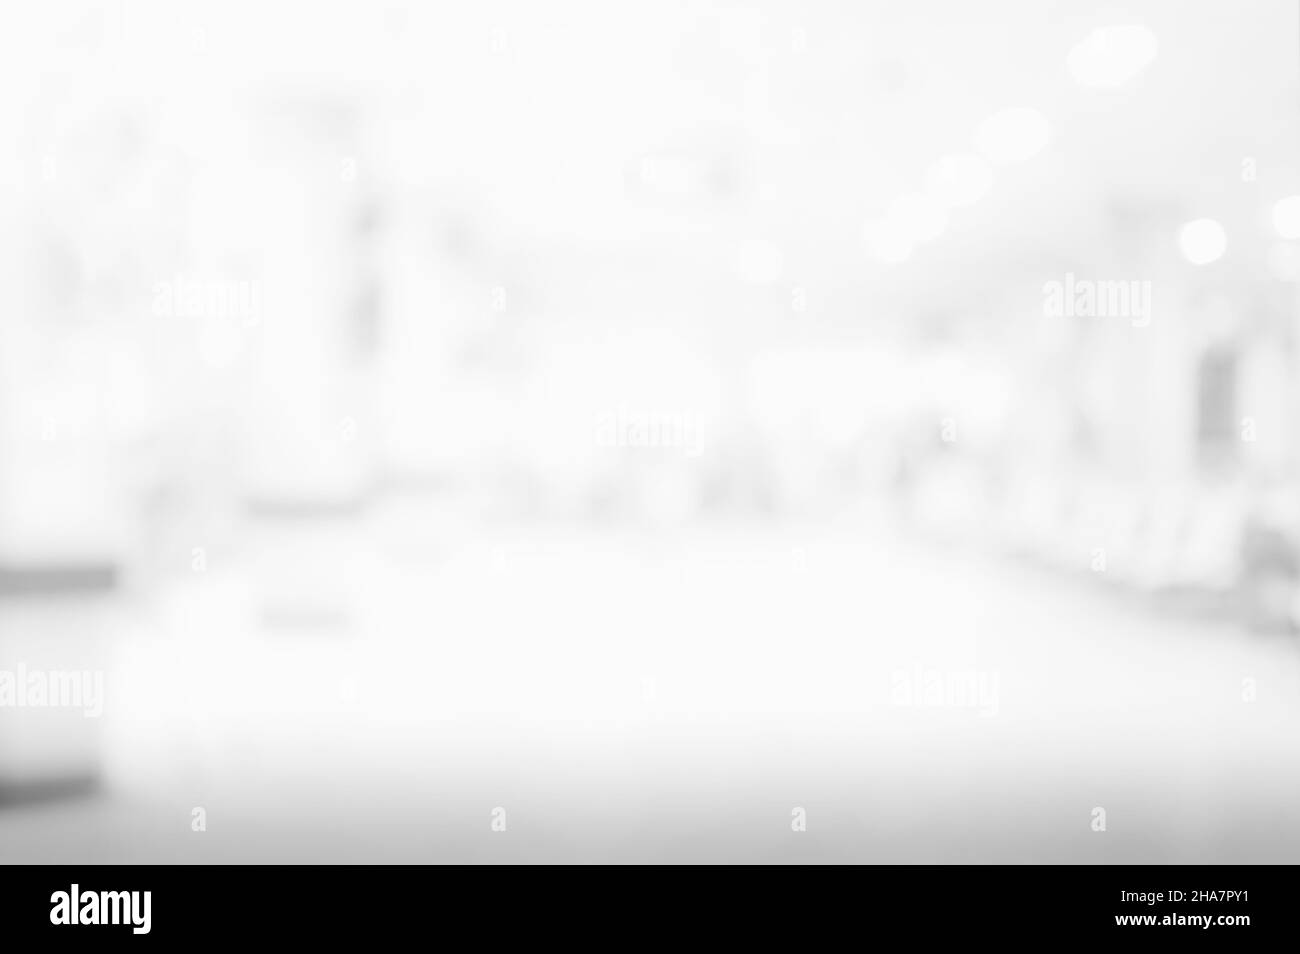 Blur background Black and White Stock Photos & Images - Alamy